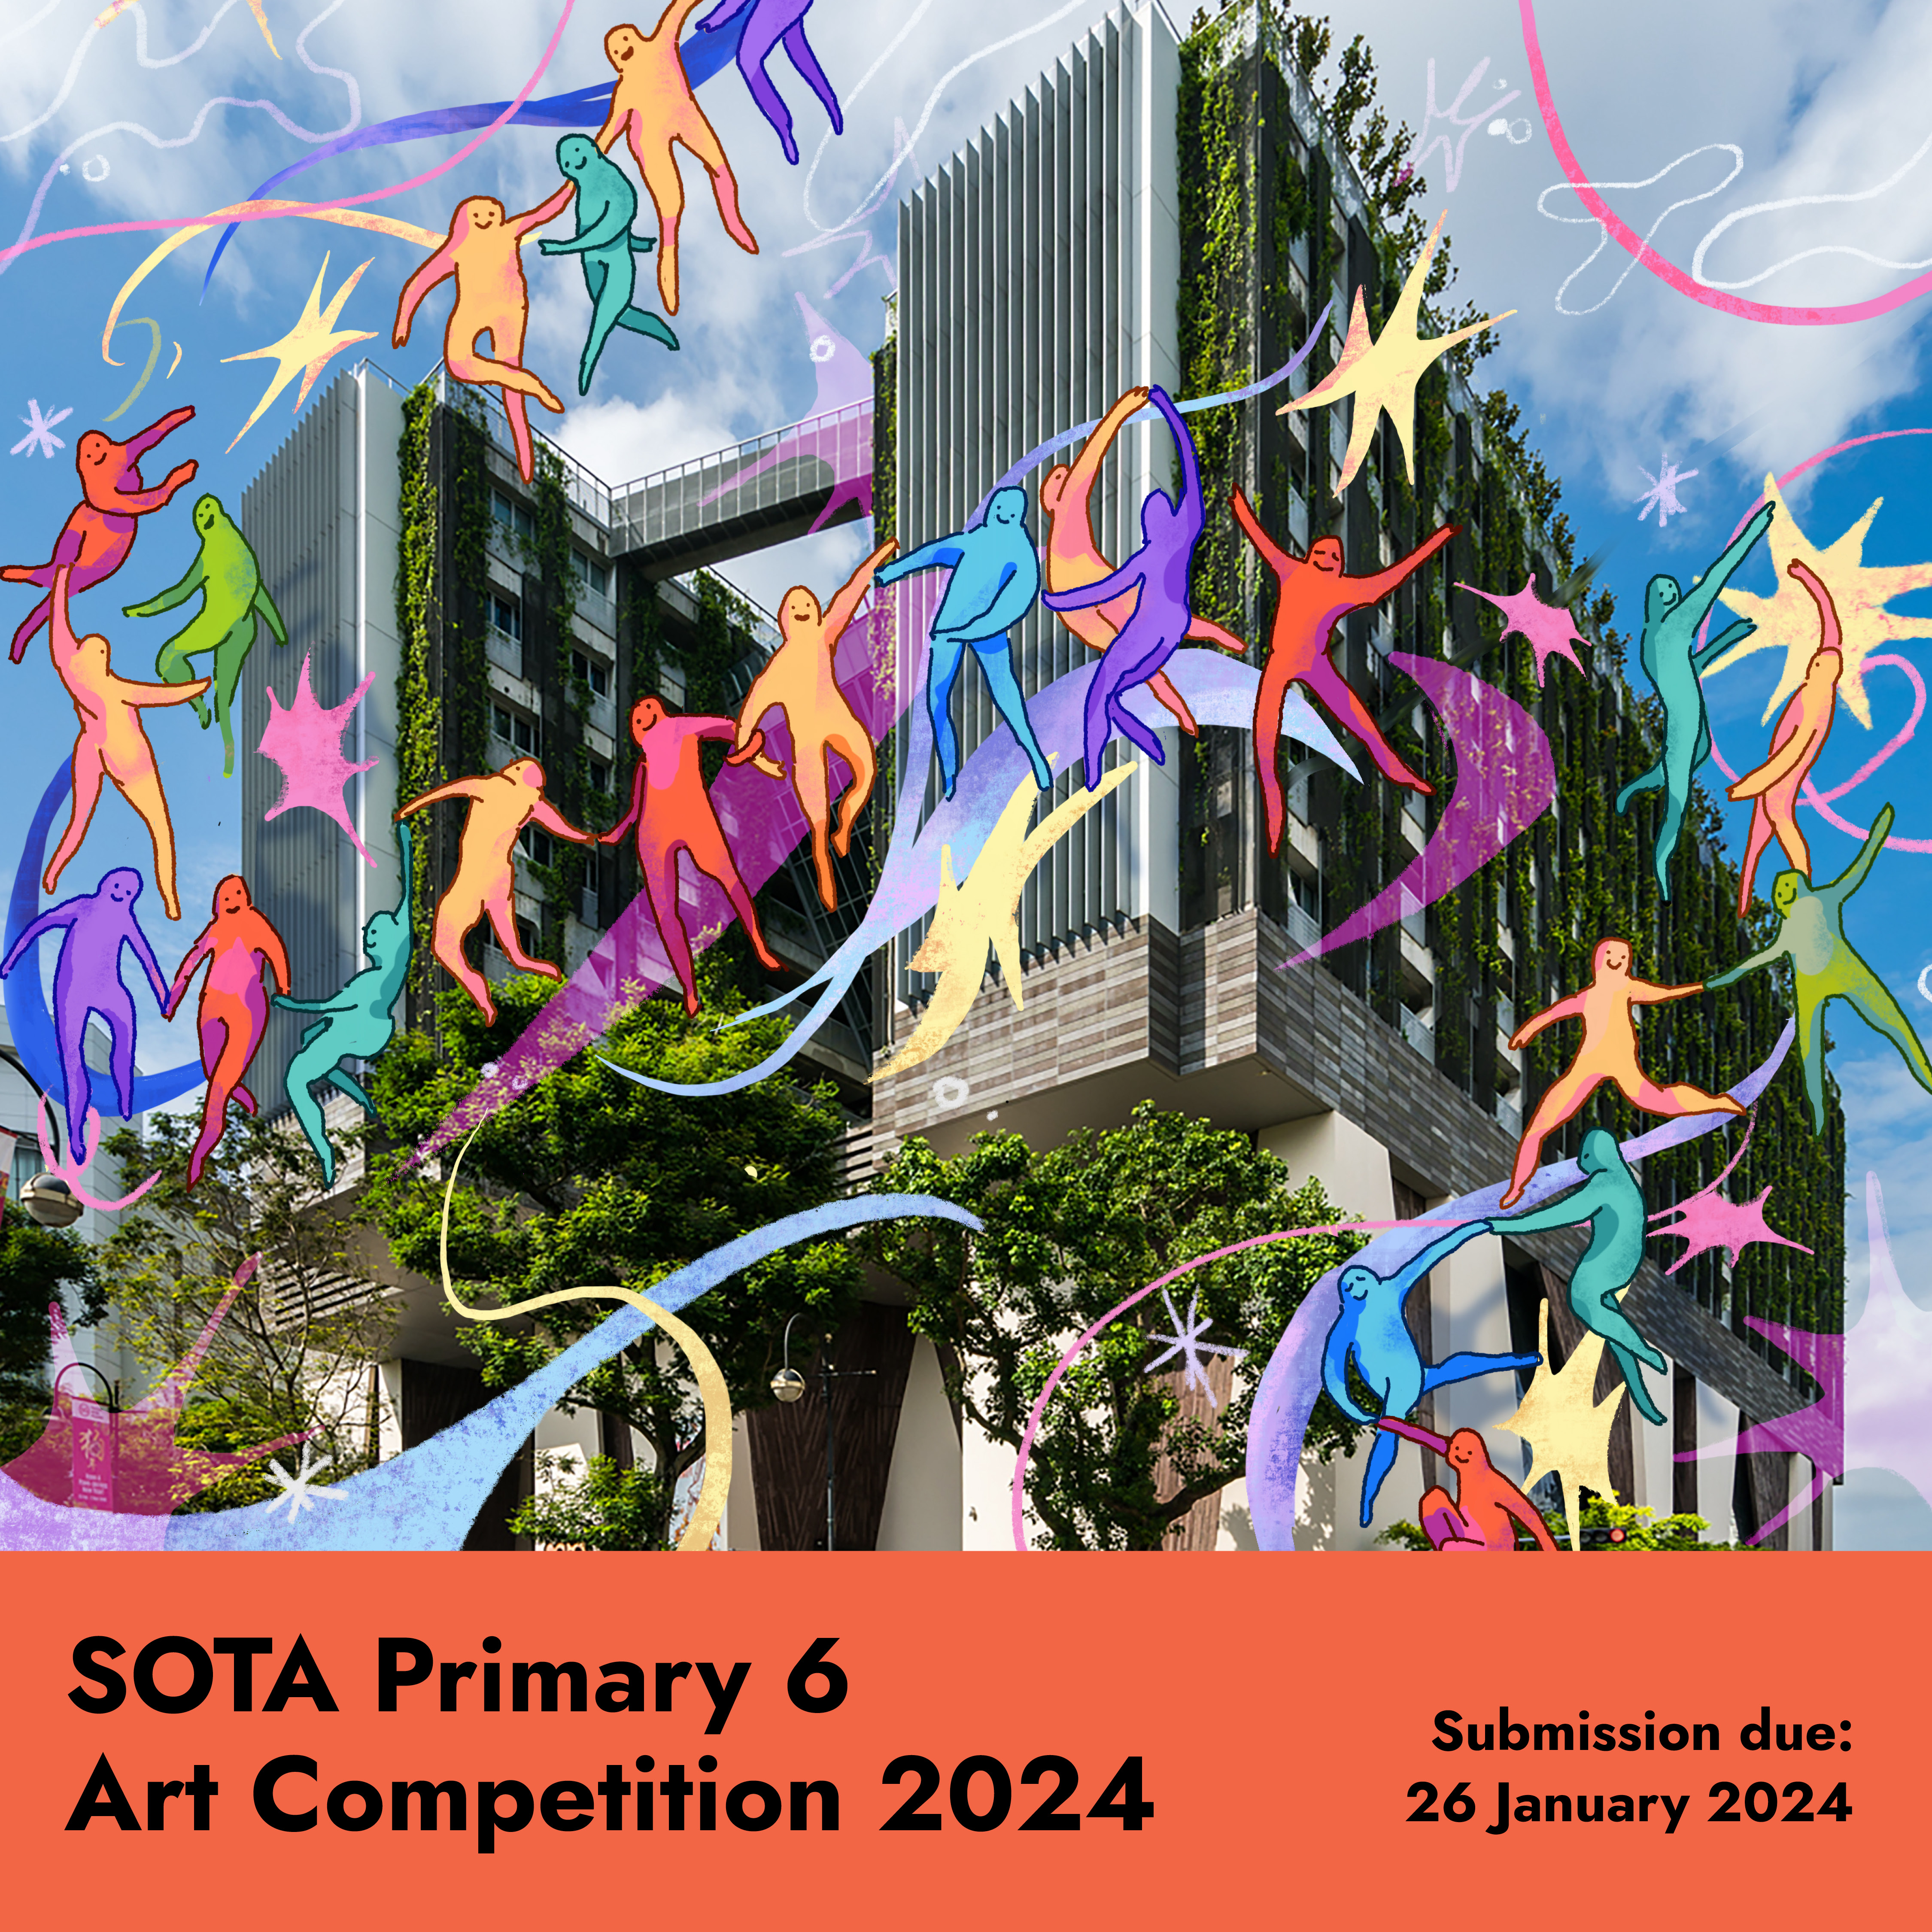 P6 Art Competition 2024